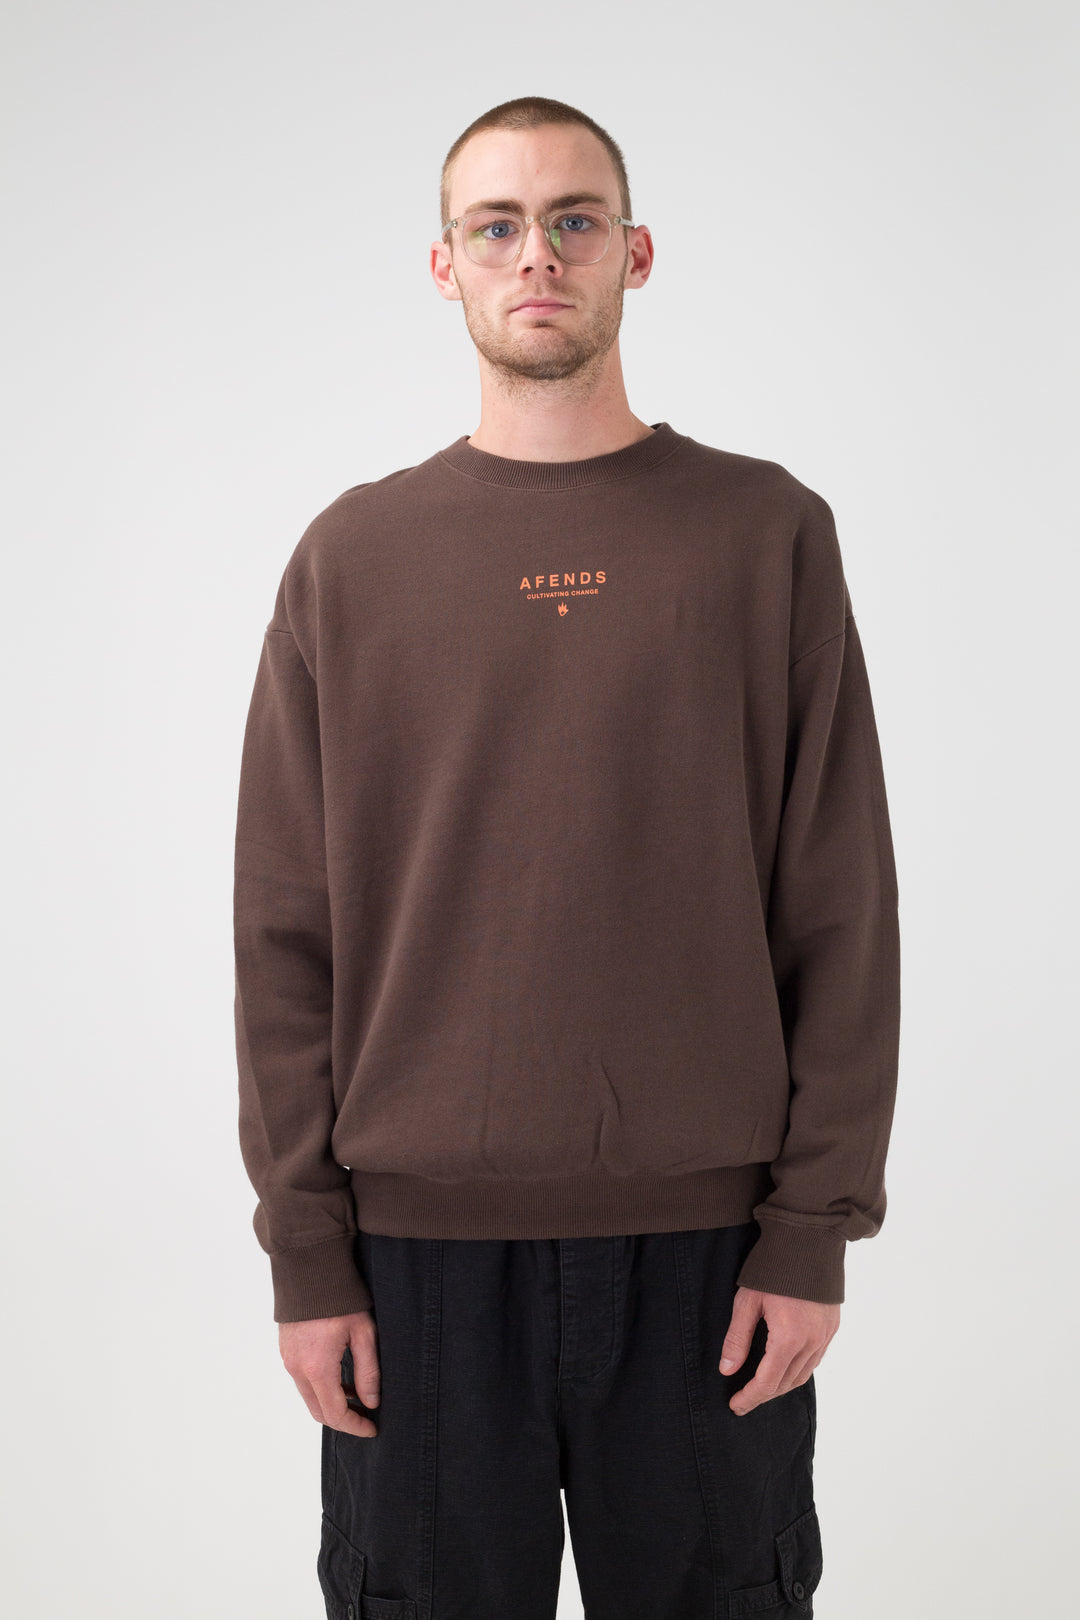 Afends Space Recycled Crew Neck